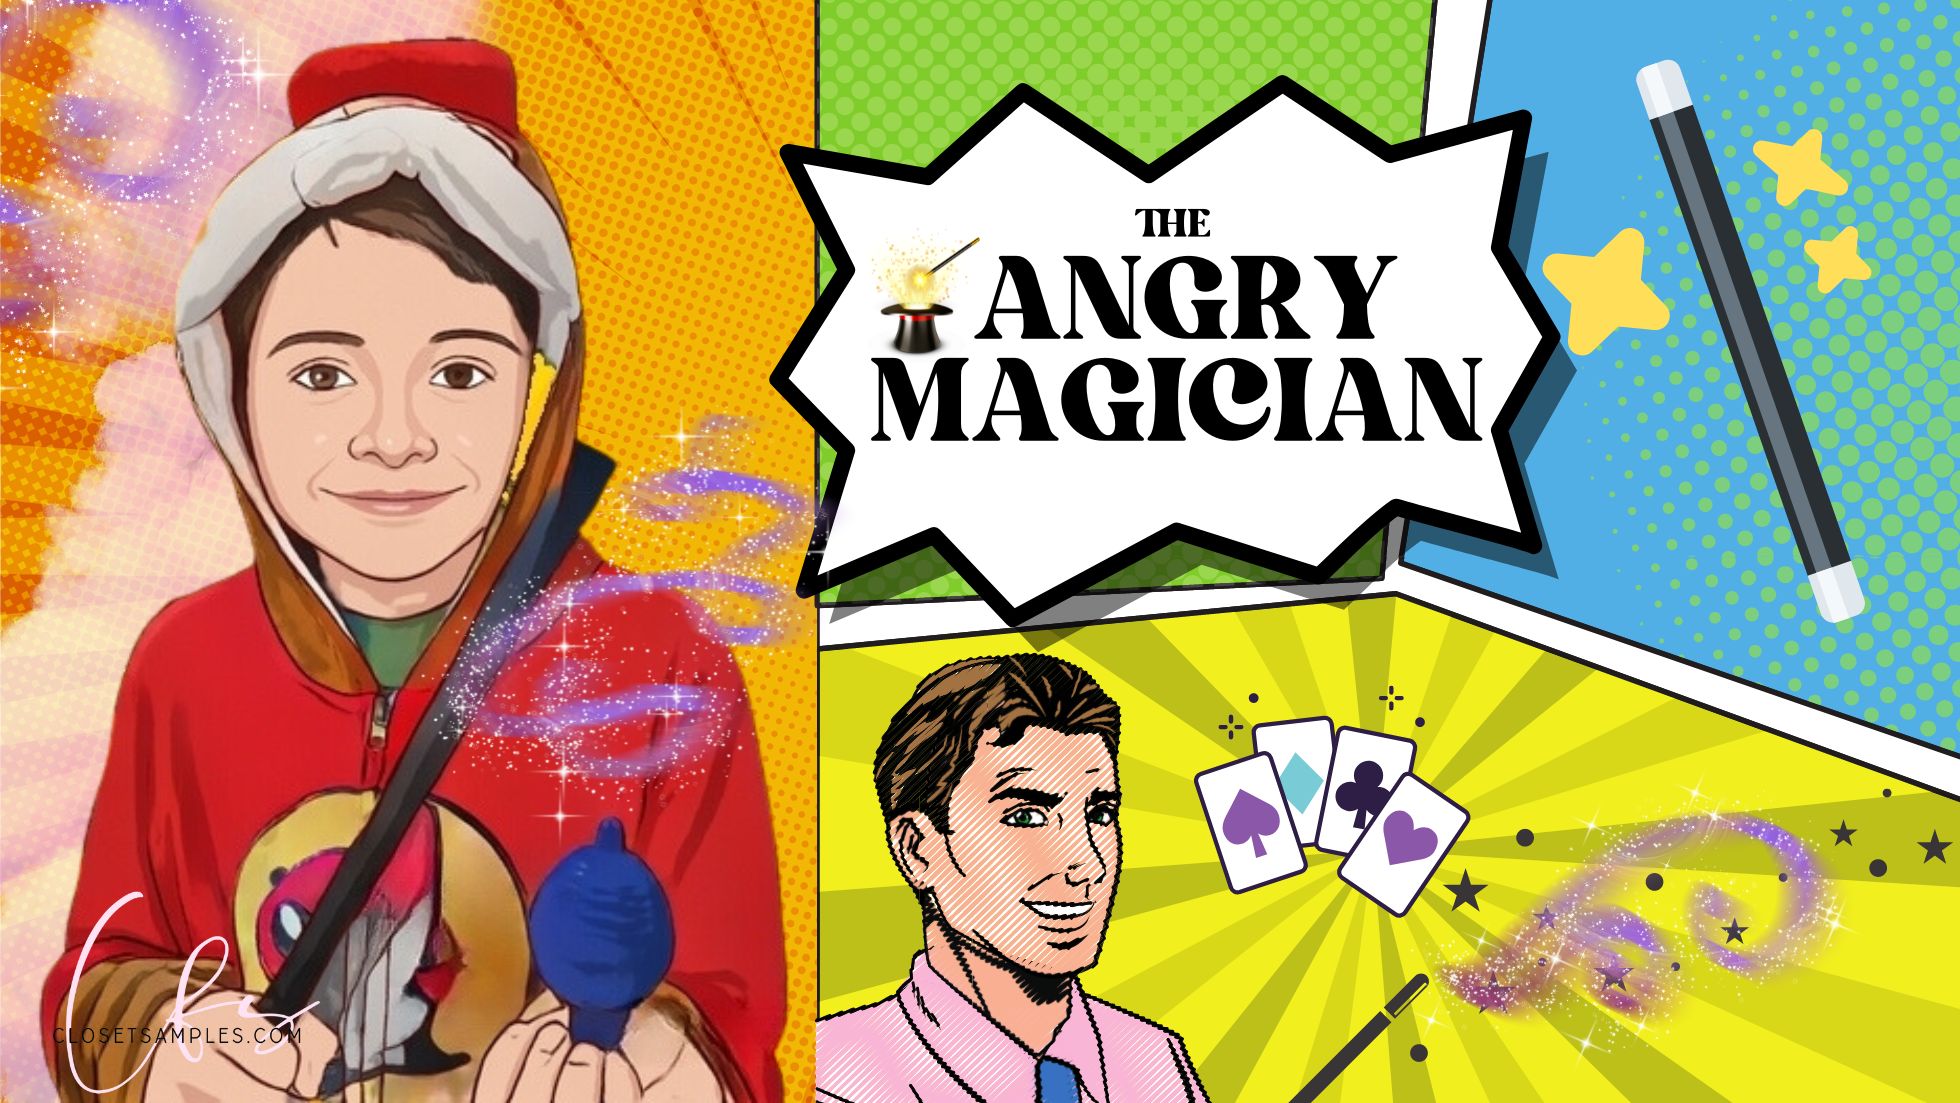 Follow The Angry Magician on TikTok for Magic and Comedy!